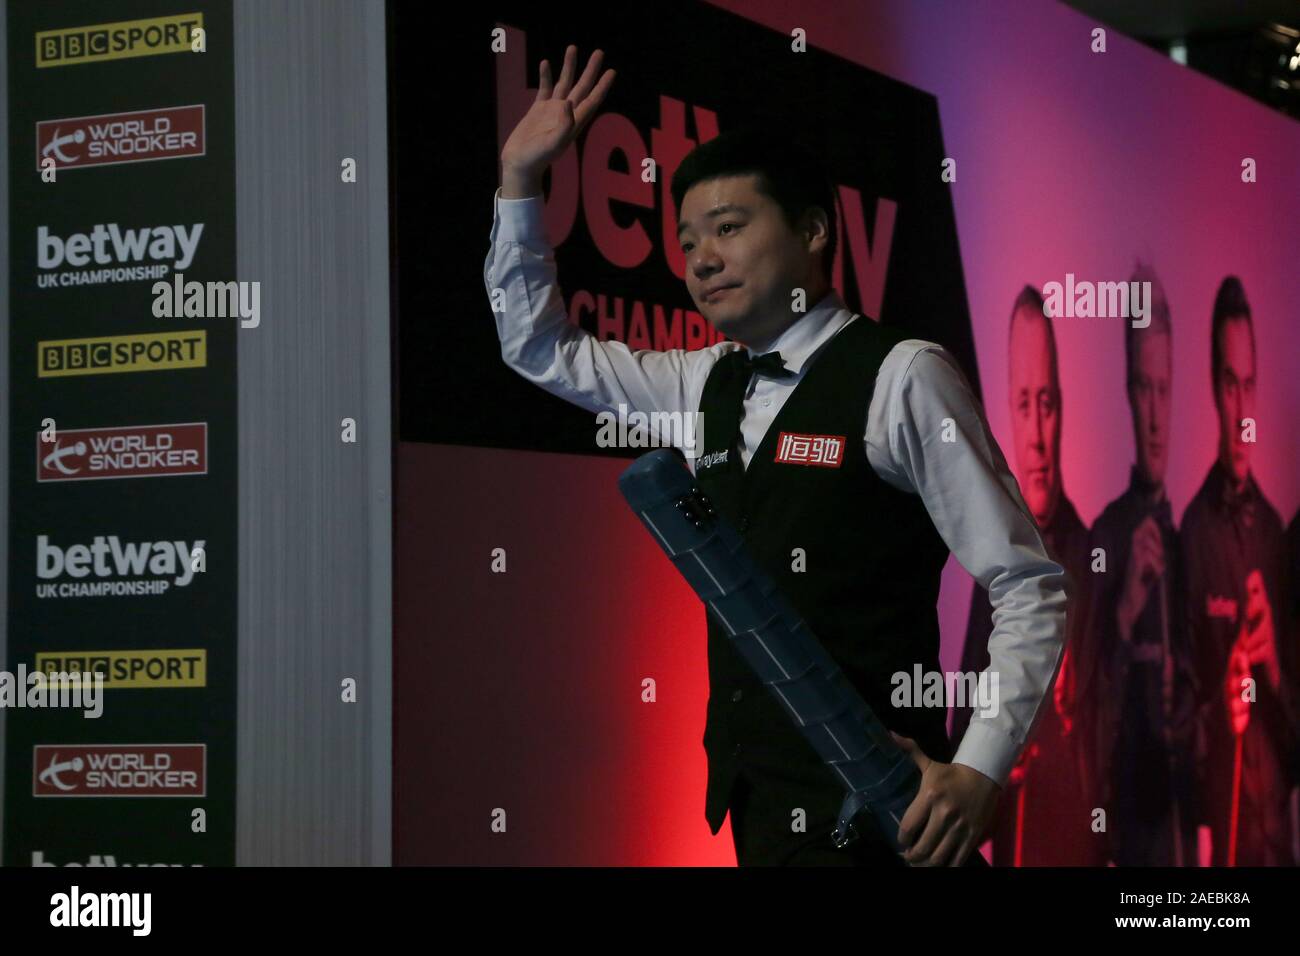 Ding Junhui enters the arena ahead of the final on day twelve of the Betway UK Championship at the York Barbican. Stock Photo